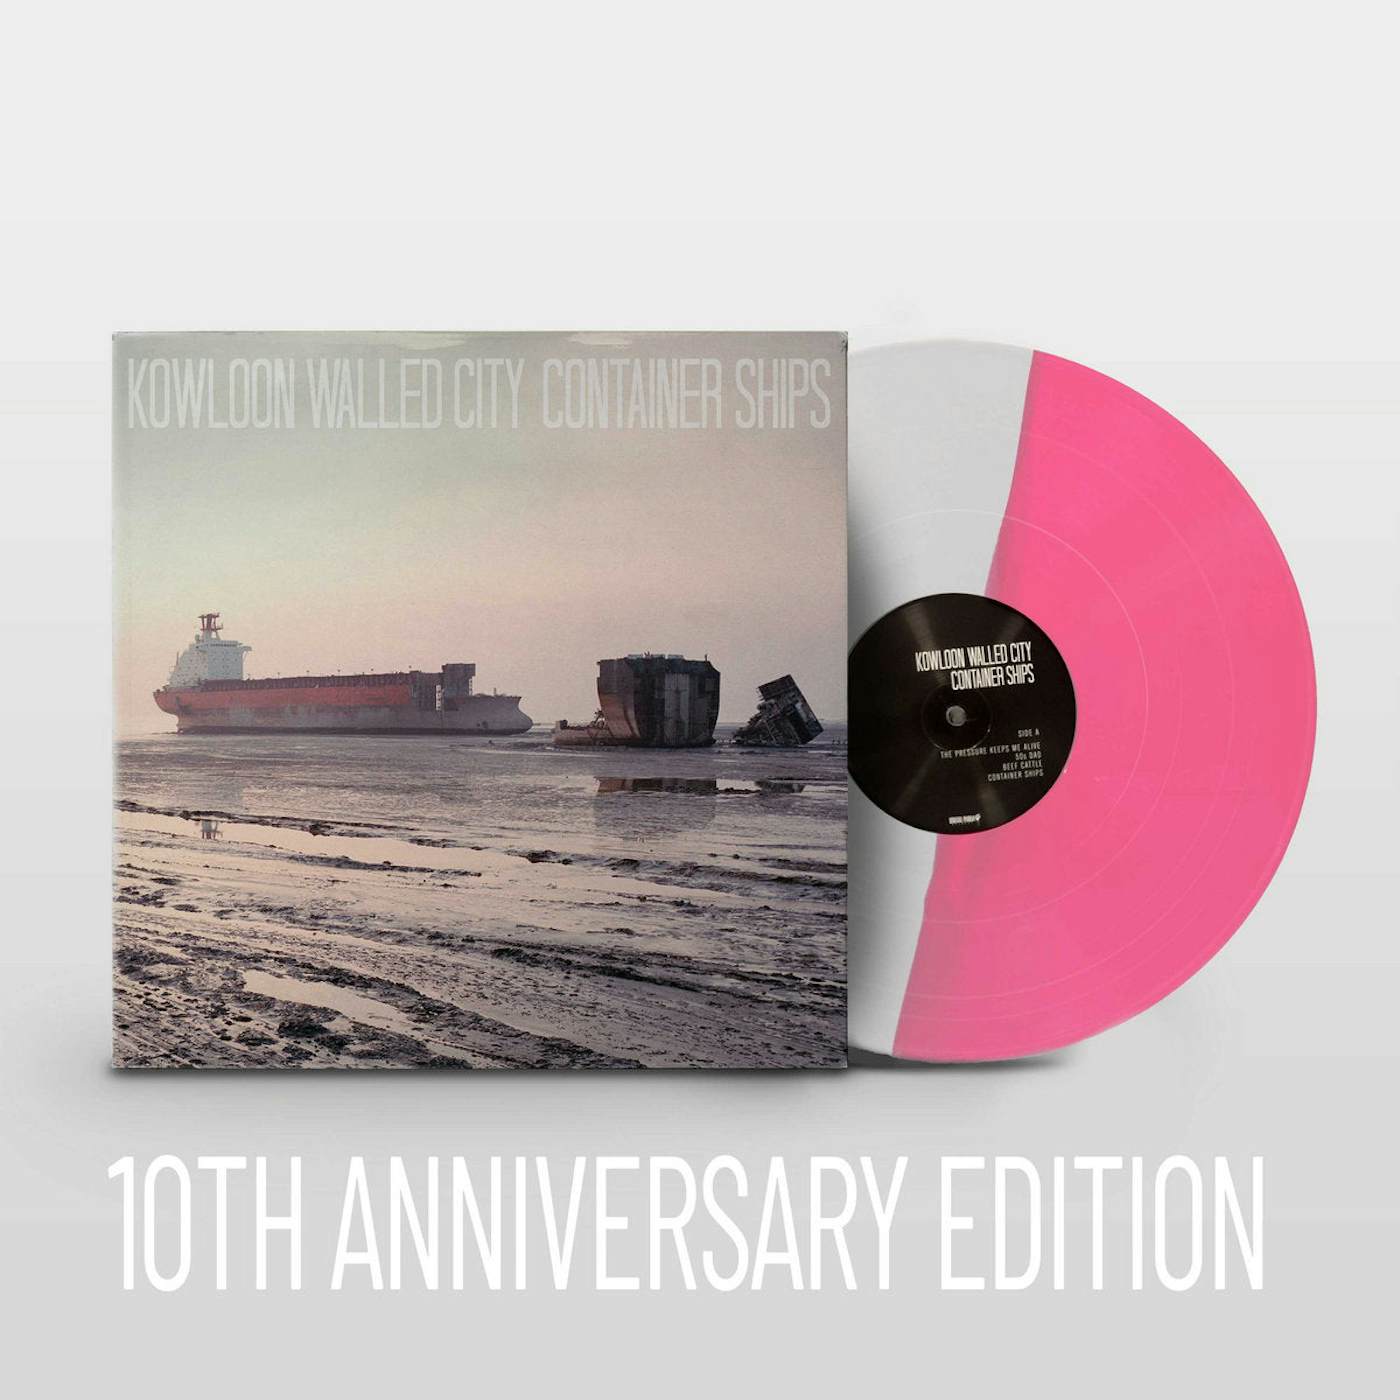 Kowloon Walled City "Container Ships" 10th Anniversary Edition 12"